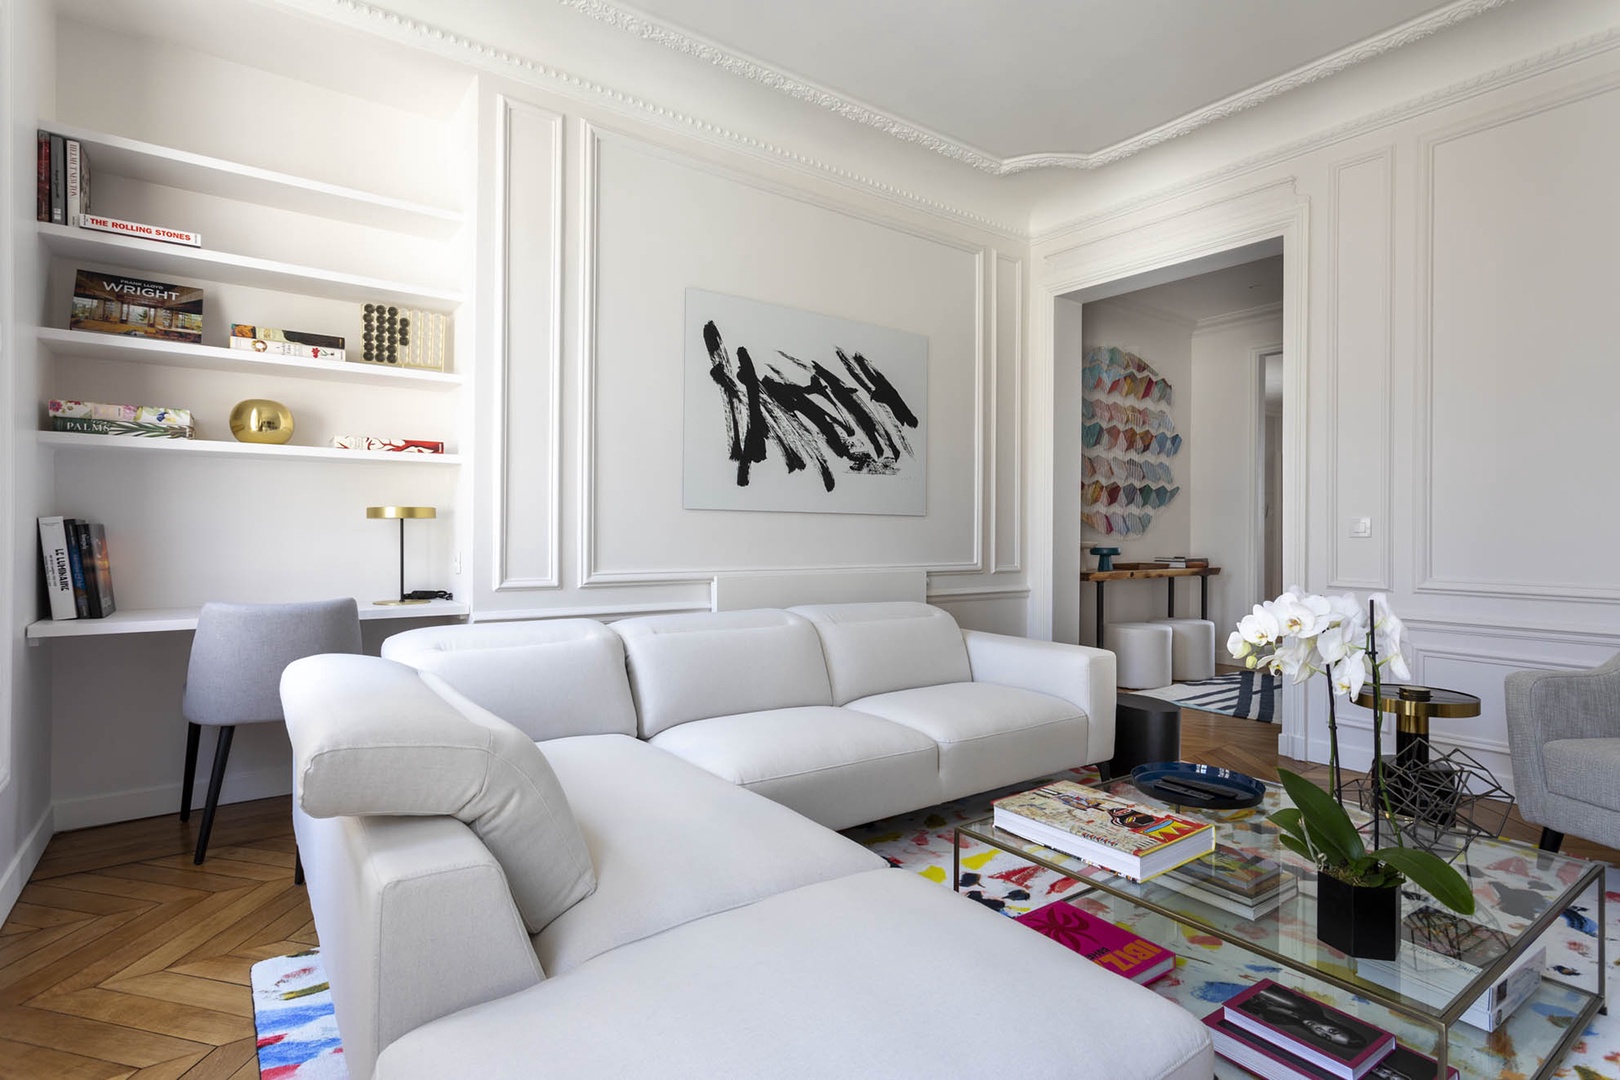 Contemporary art decorates the walls of the living room.